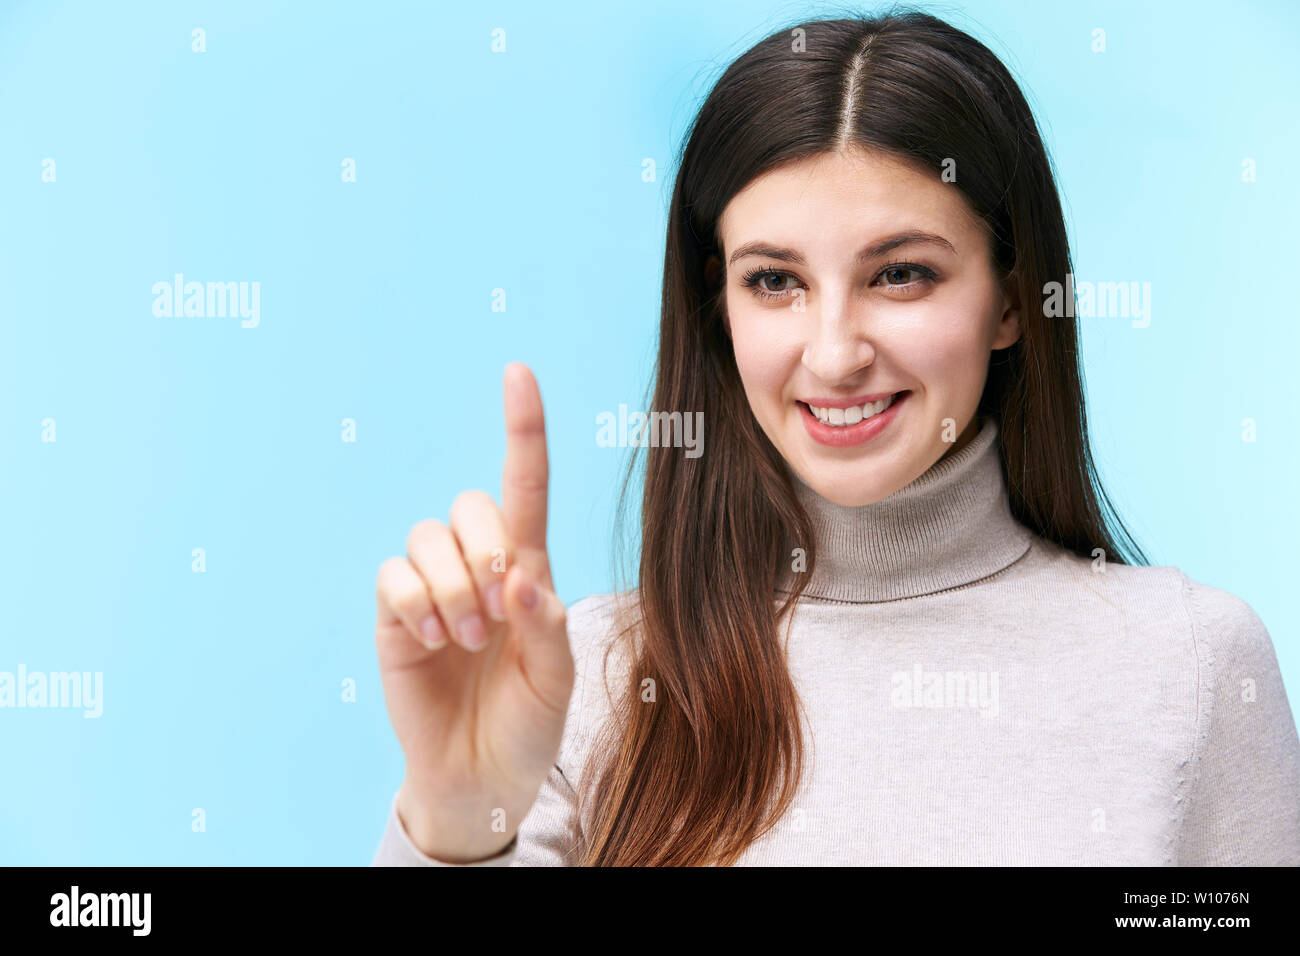 beautiful young caucasian woman pressing a virtual button, looking at camera smiling, isolated on blue background Stock Photo